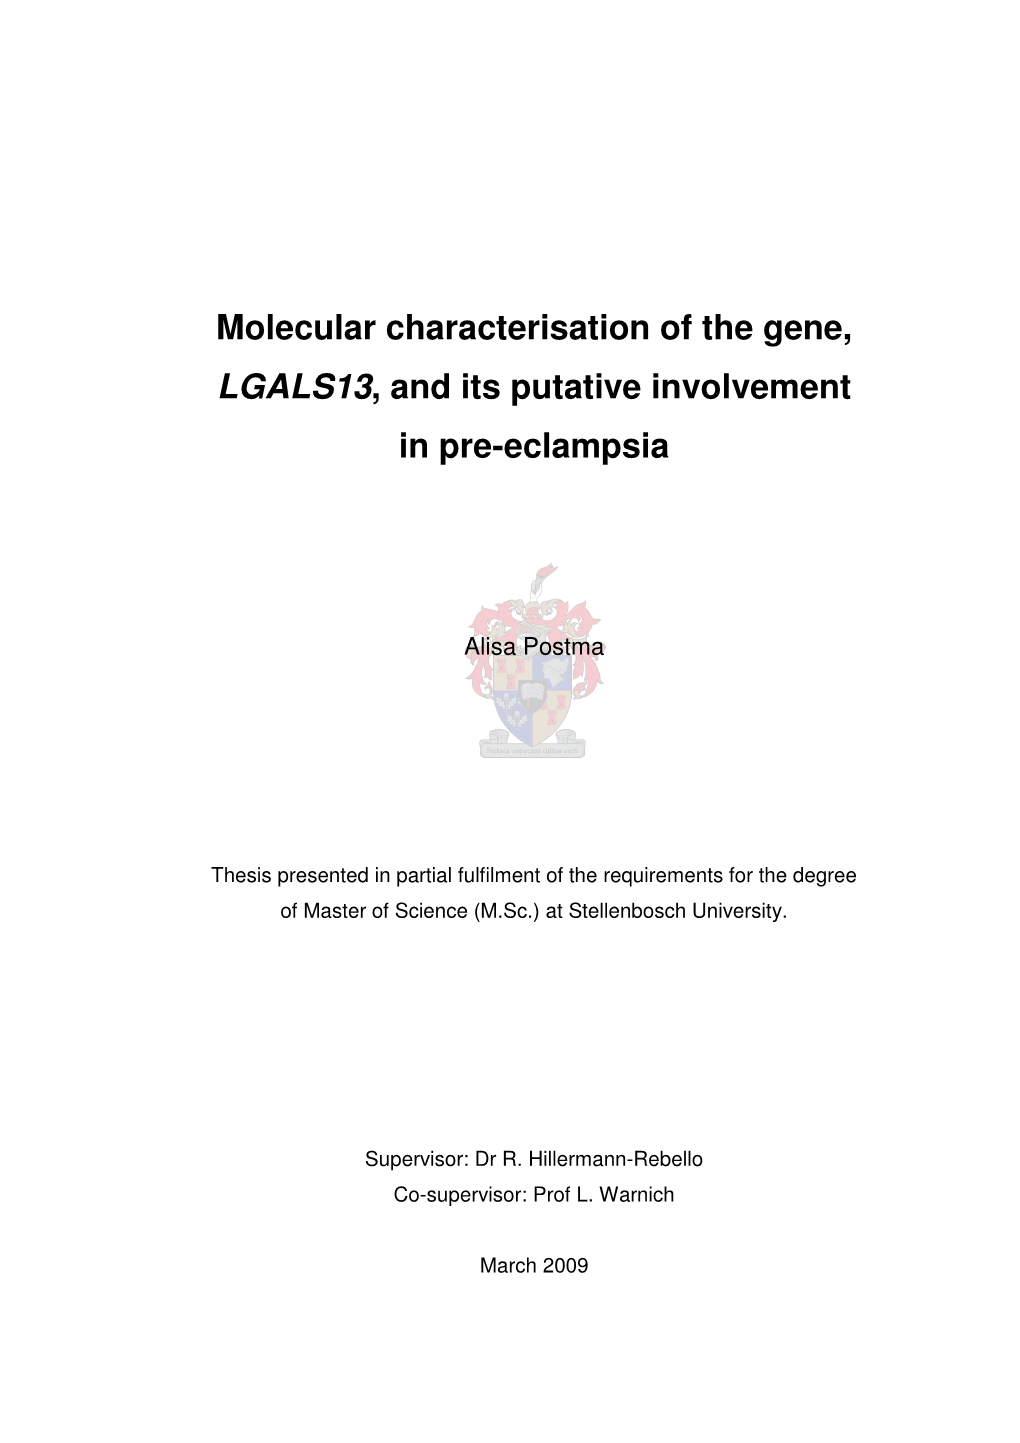 Molecular Characterisation of the Gene, LGALS13, and Its Putative Involvement in Pre-Eclampsia